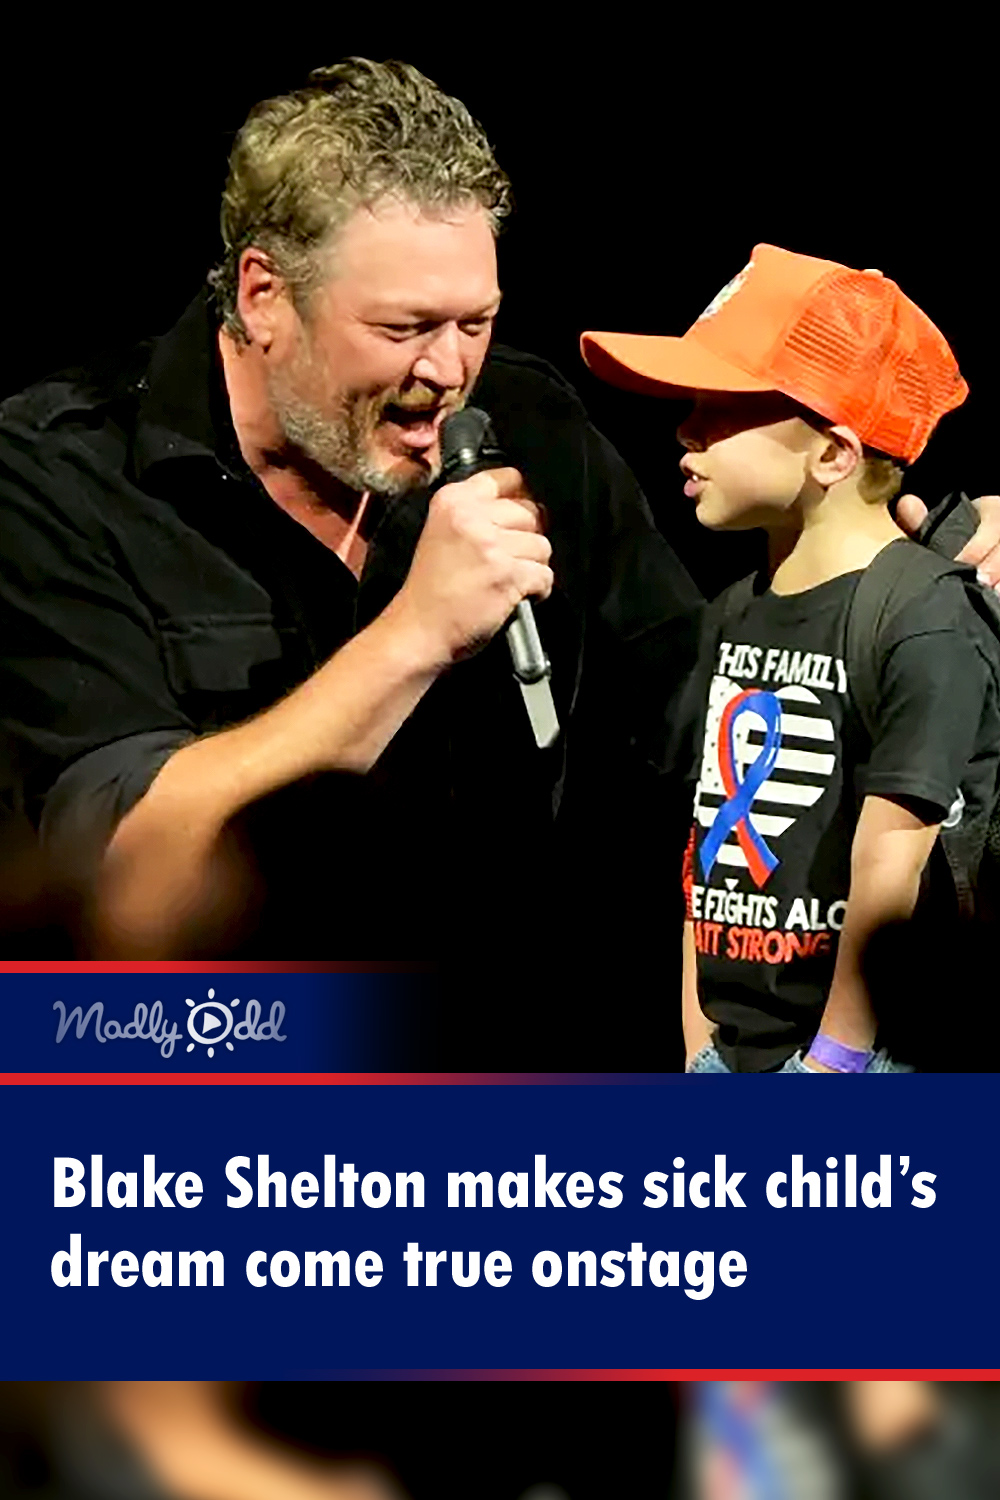 Blake Shelton sings “God’s Country” duet with Six-year-old awaiting heart transplant